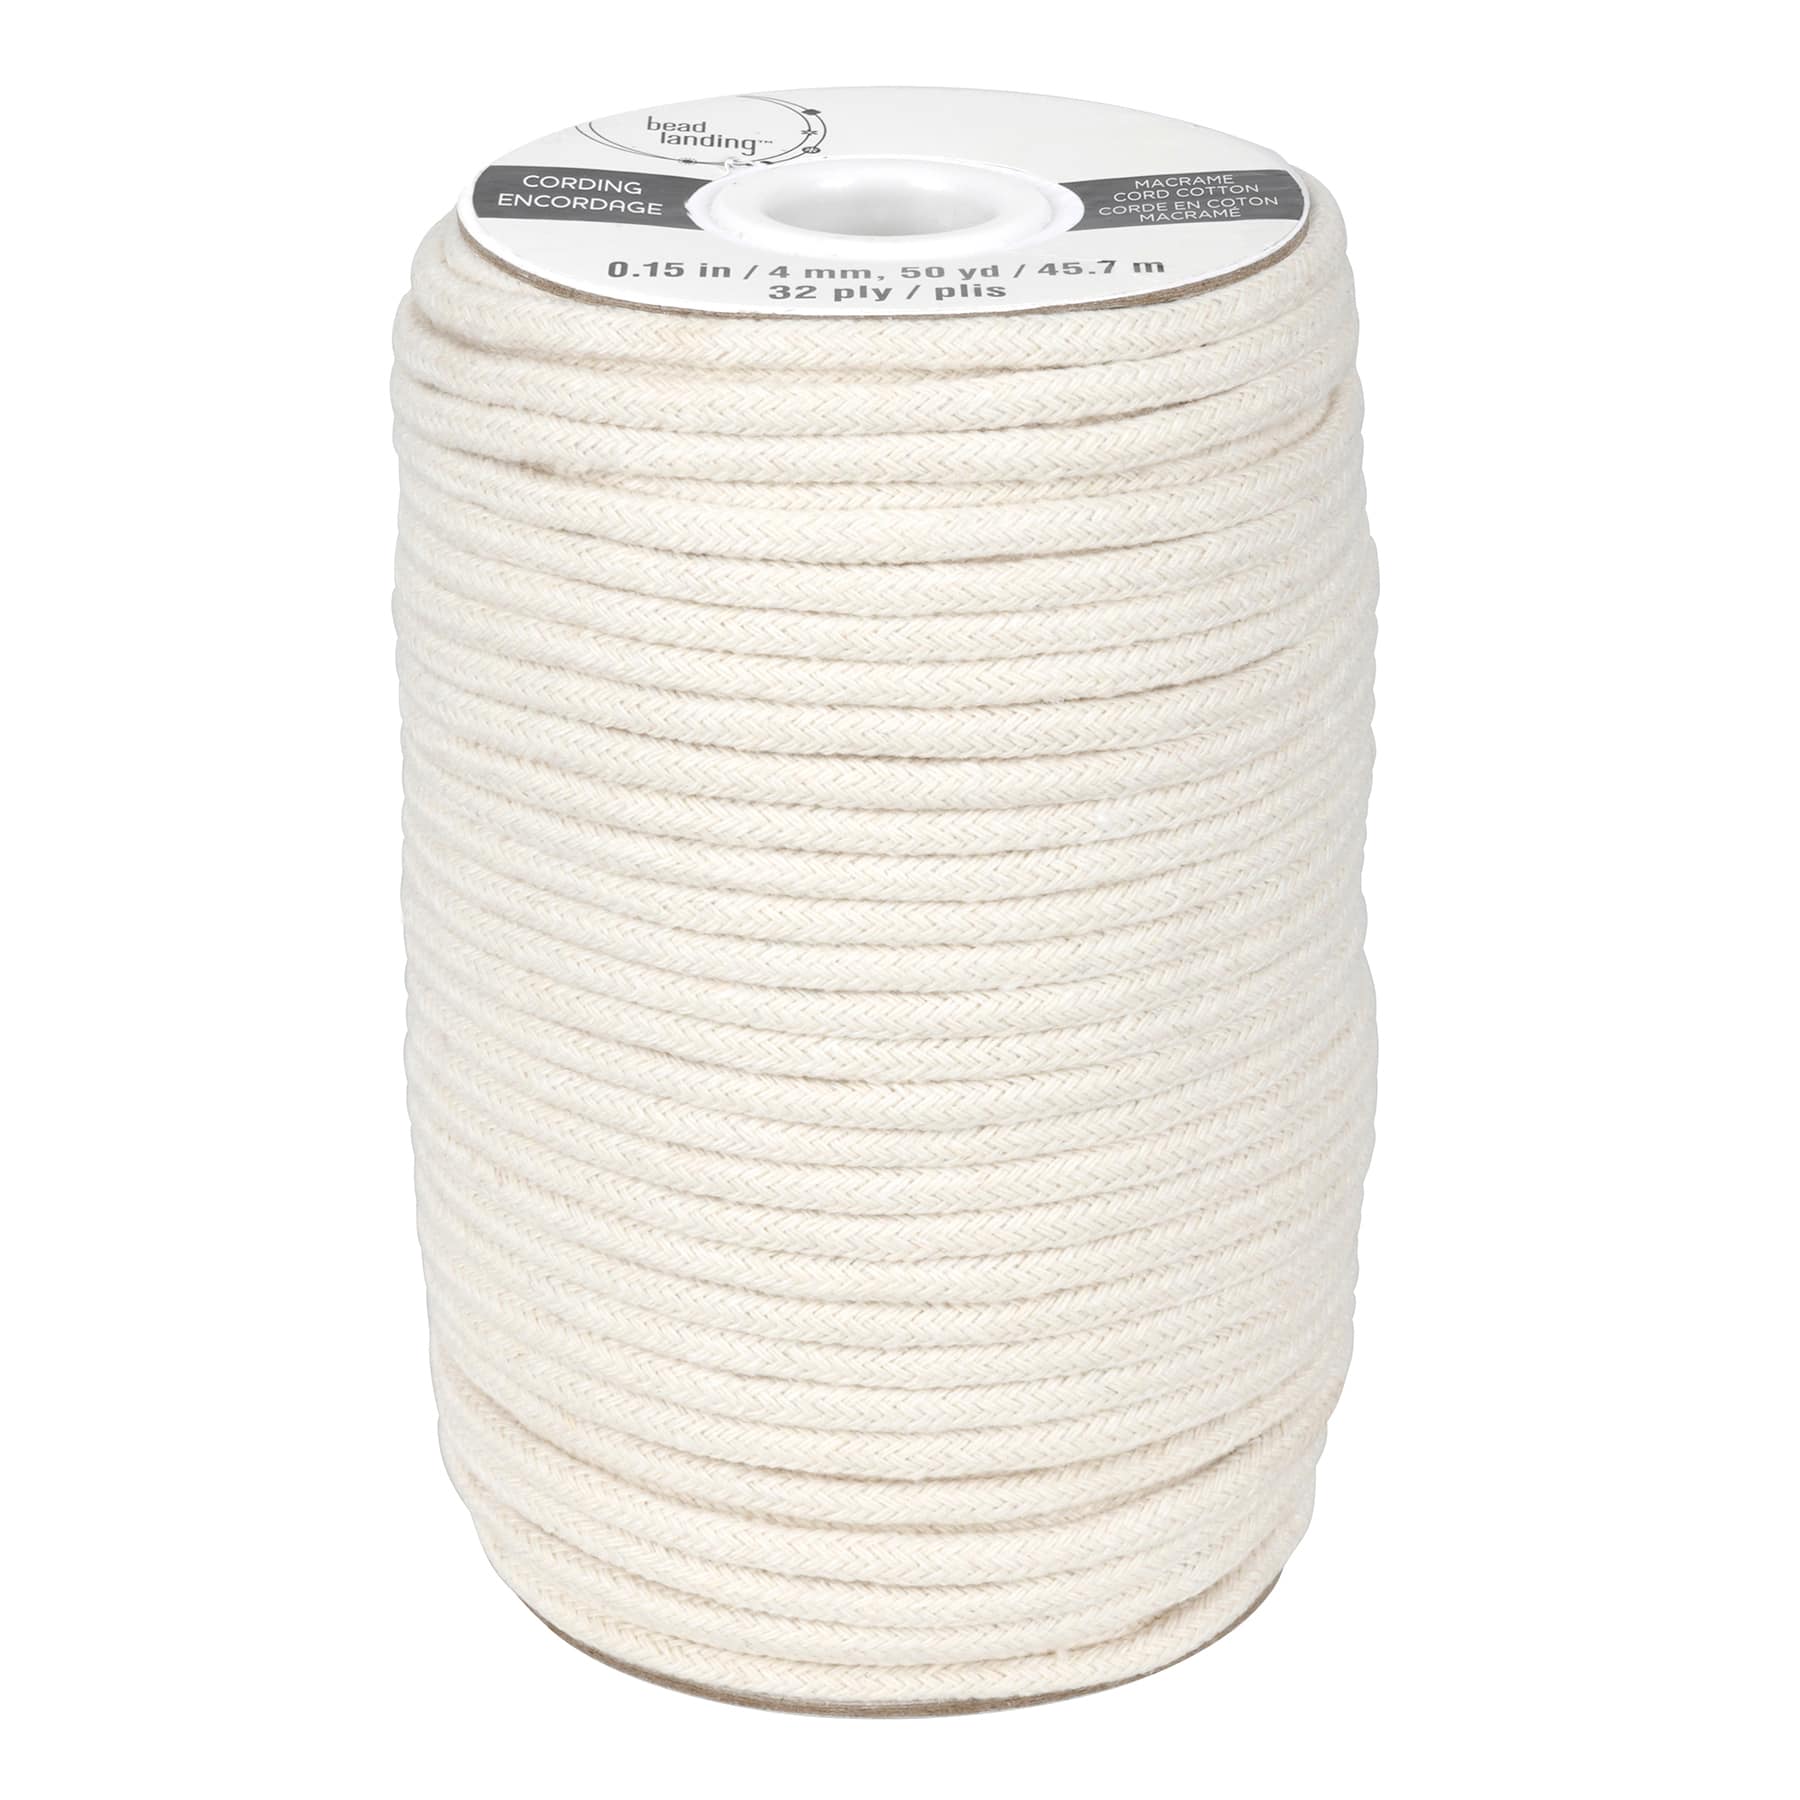 Buy in Bulk - 8 Pack: 4mm Natural Cotton Macramé Cord by Bead